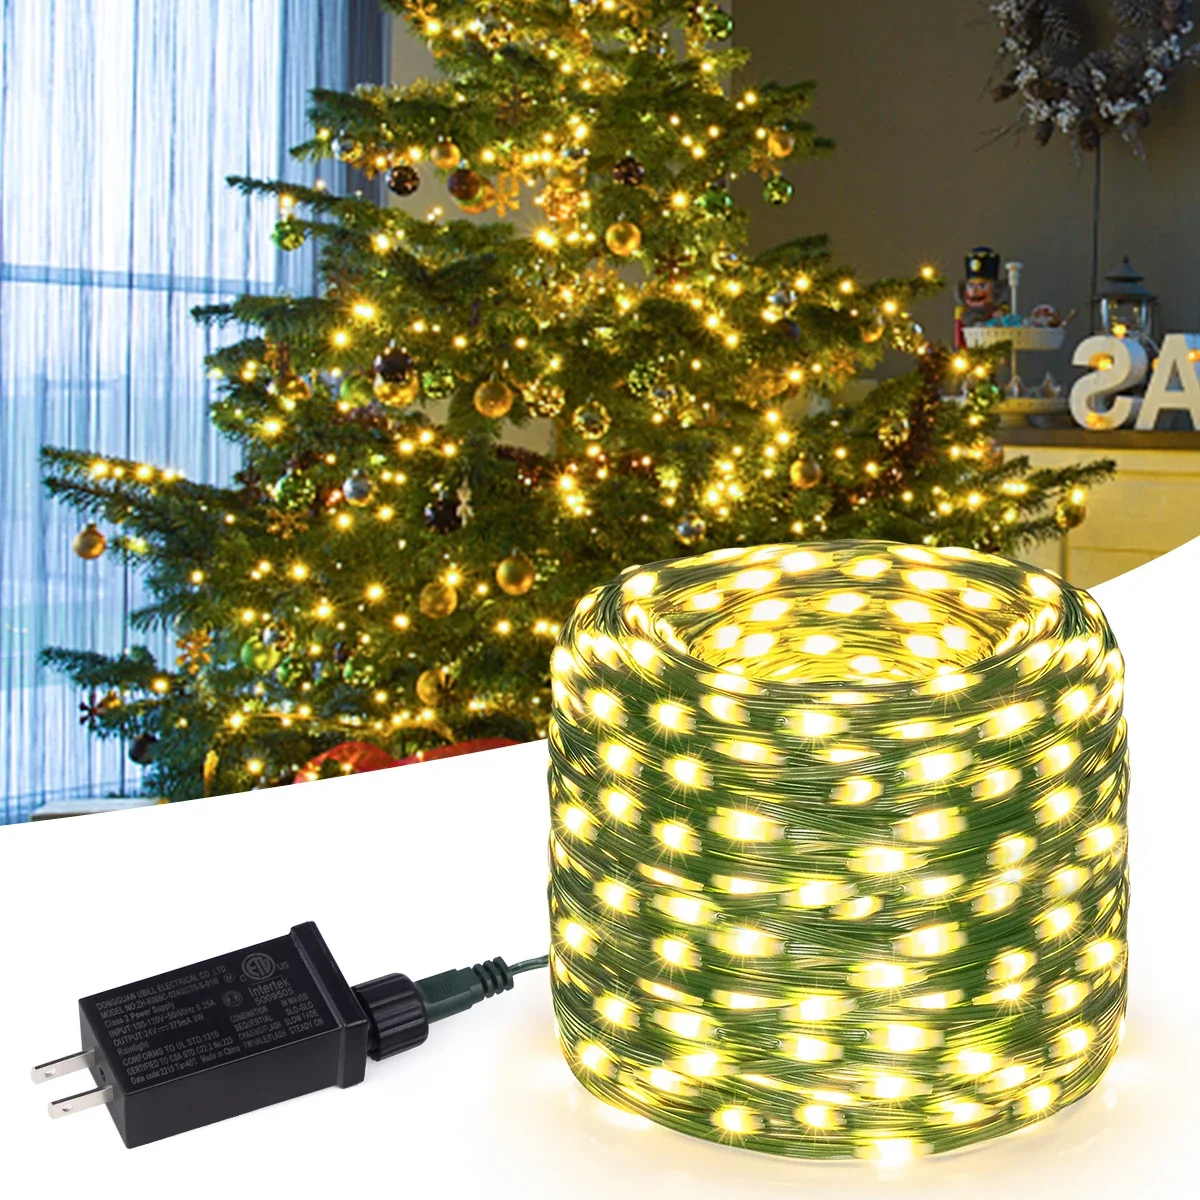 50M 100M Green Wire LED String New Year Fairy Lights Outdoor Garden Christmas Tree Decor Led Garland Waterproof 110v-220V Solar